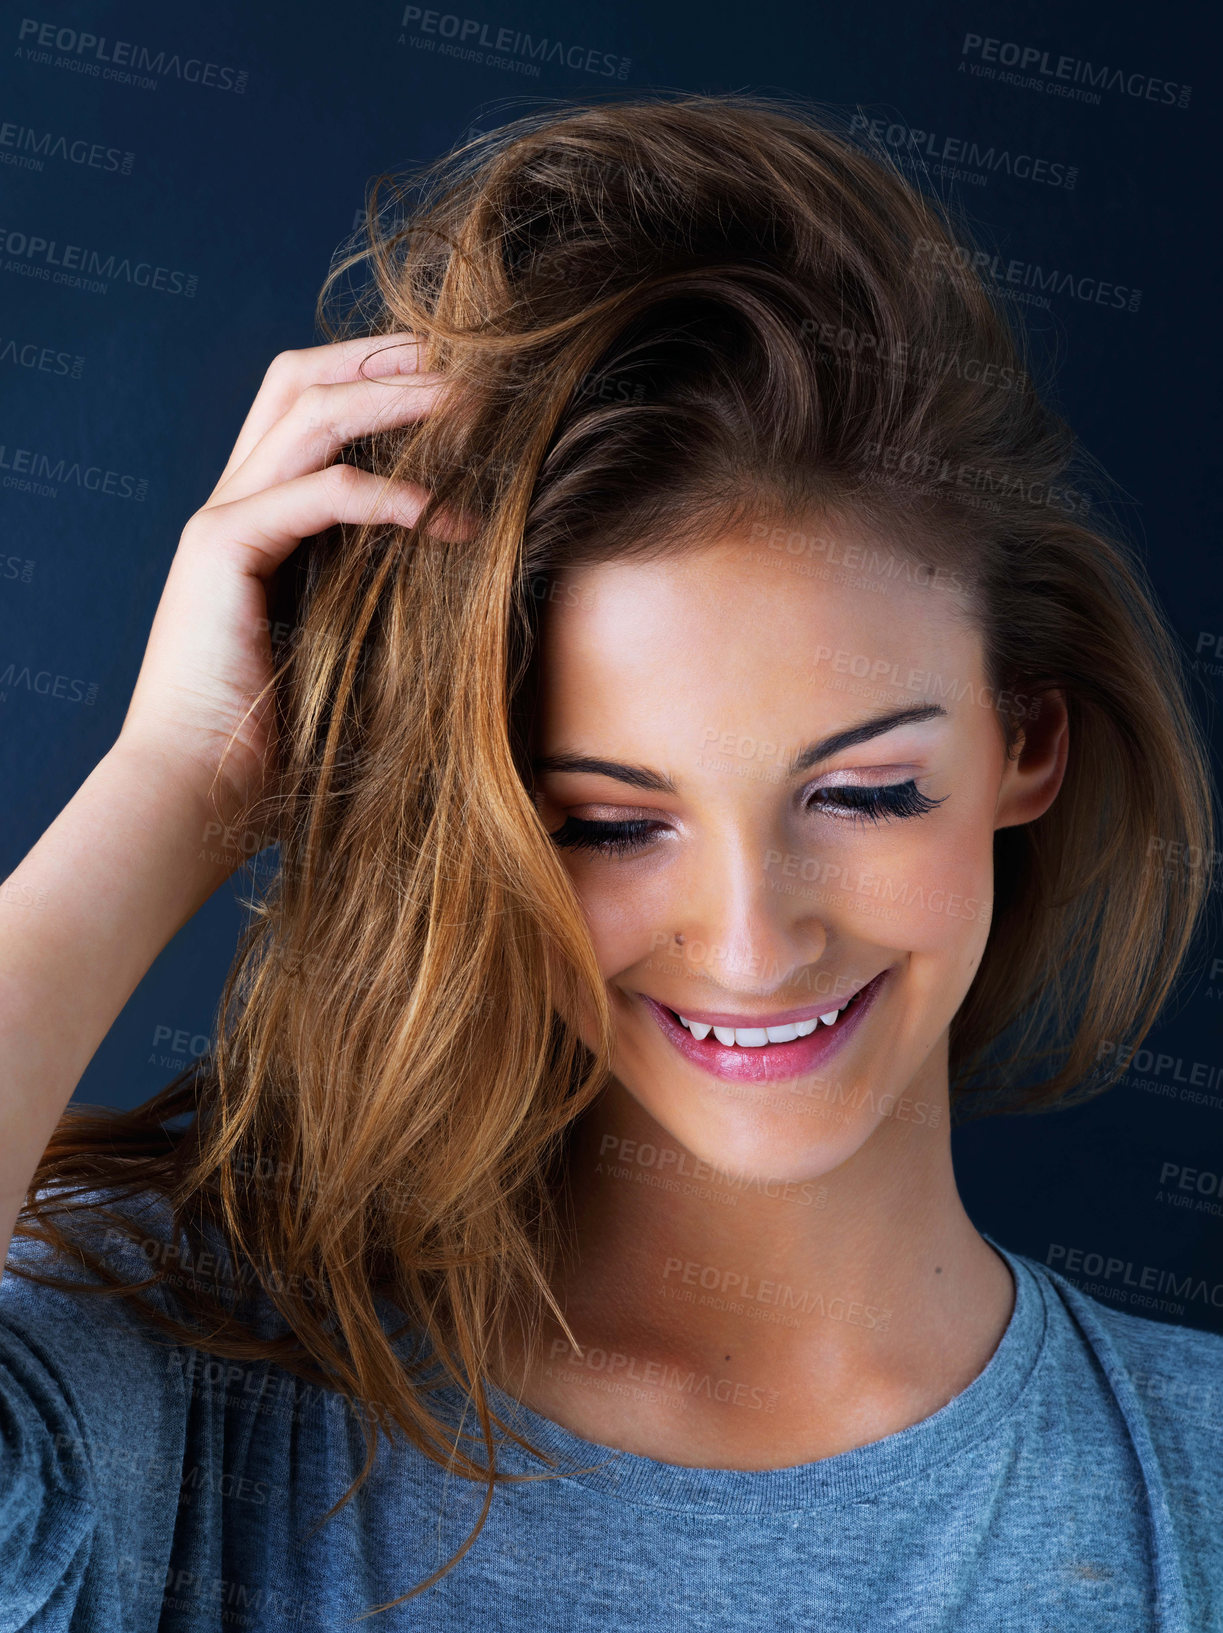 Buy stock photo Studio shot of a cute teenage girl with her hand in her hair posing against a dark background